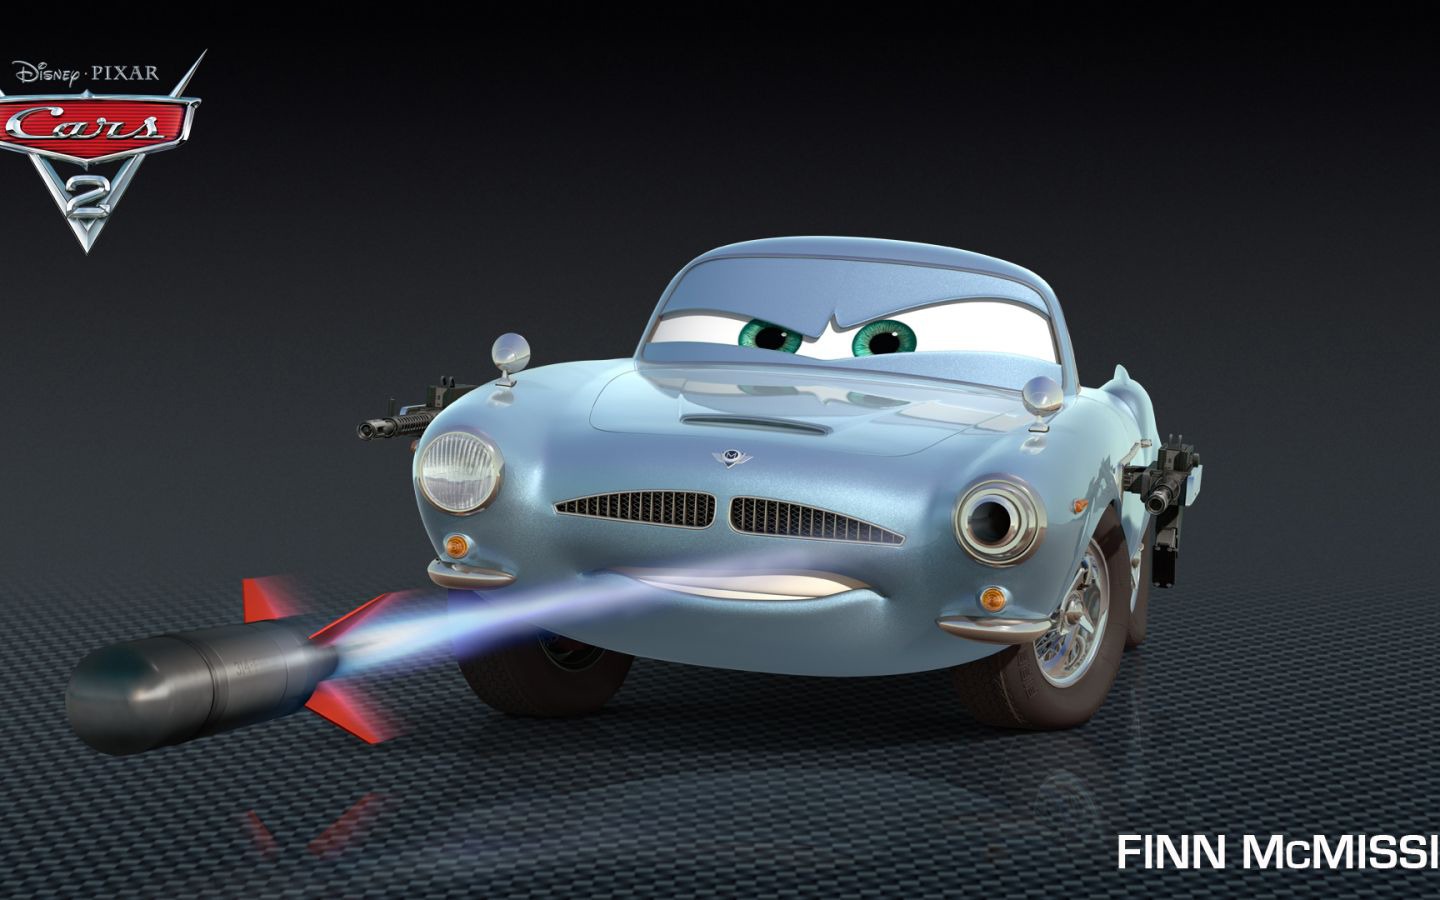 Cars 2 wallpapers #18 - 1440x900